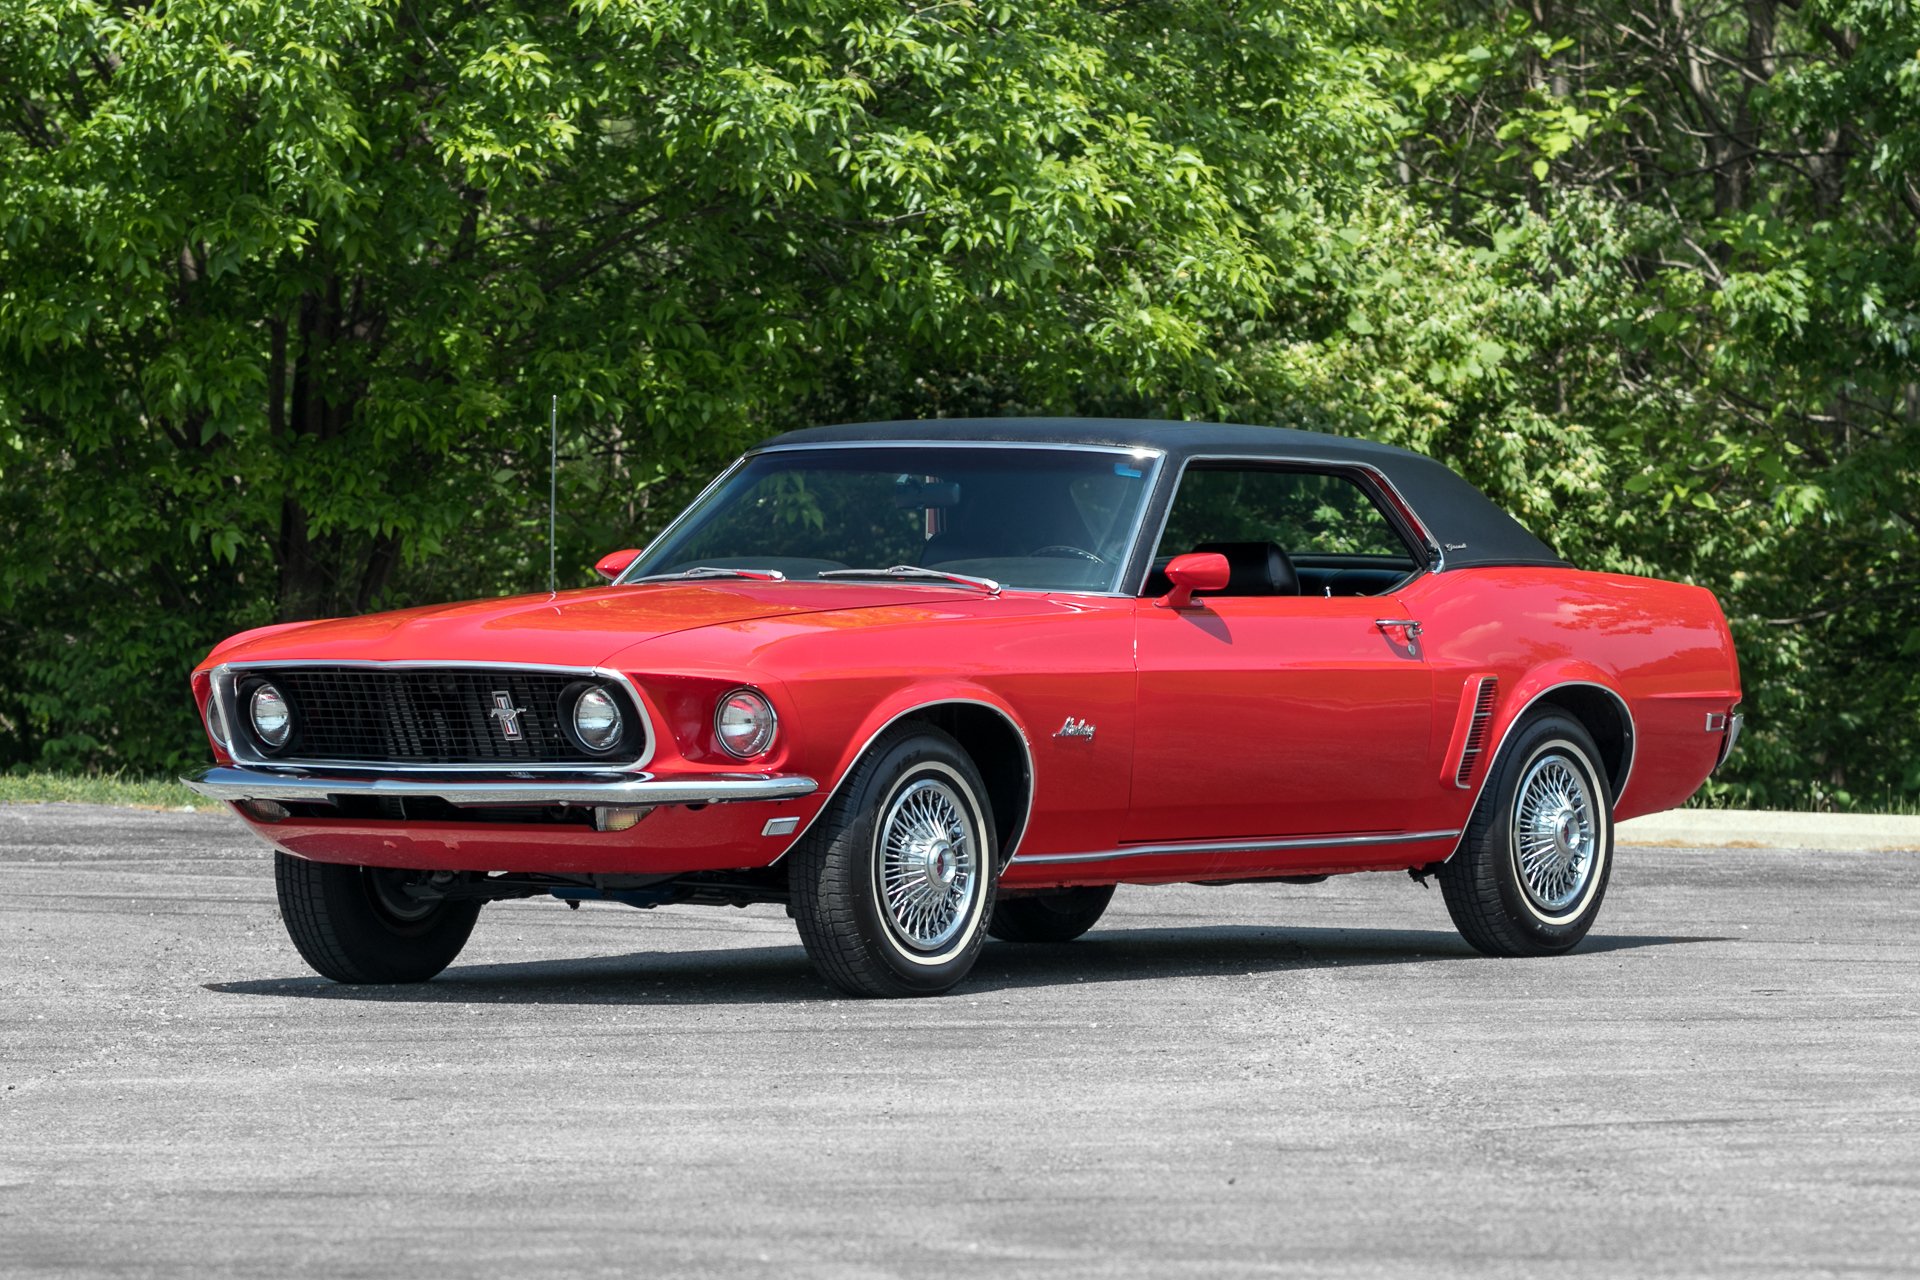 1969 Ford Mustang Grande Coupe.